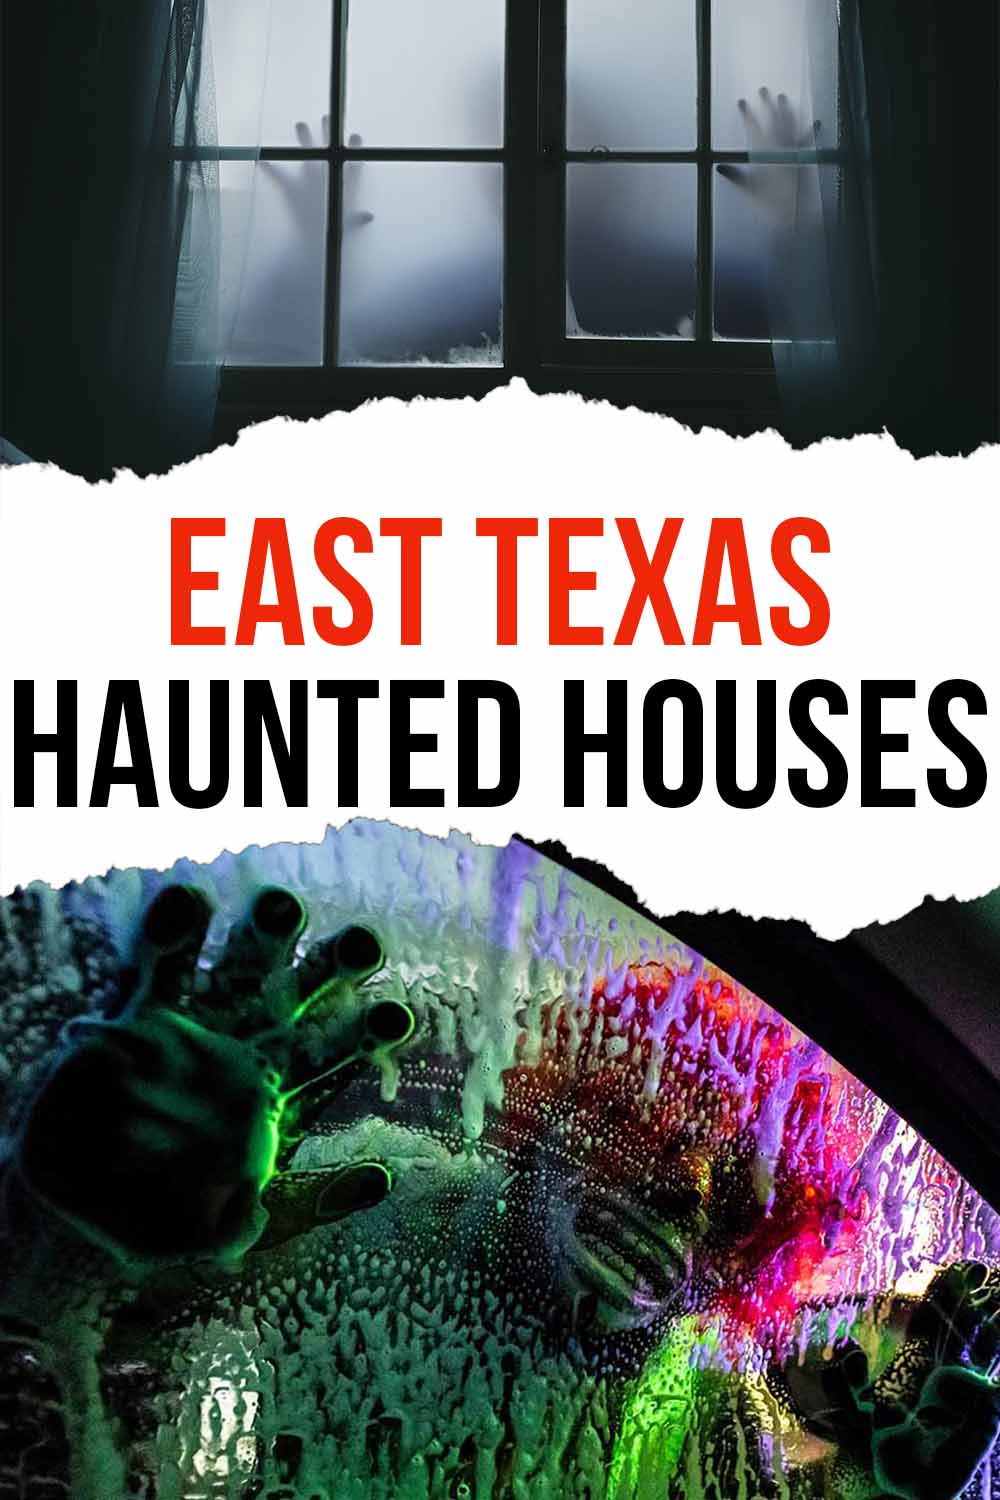 Haunted Houses to visit in East Texas